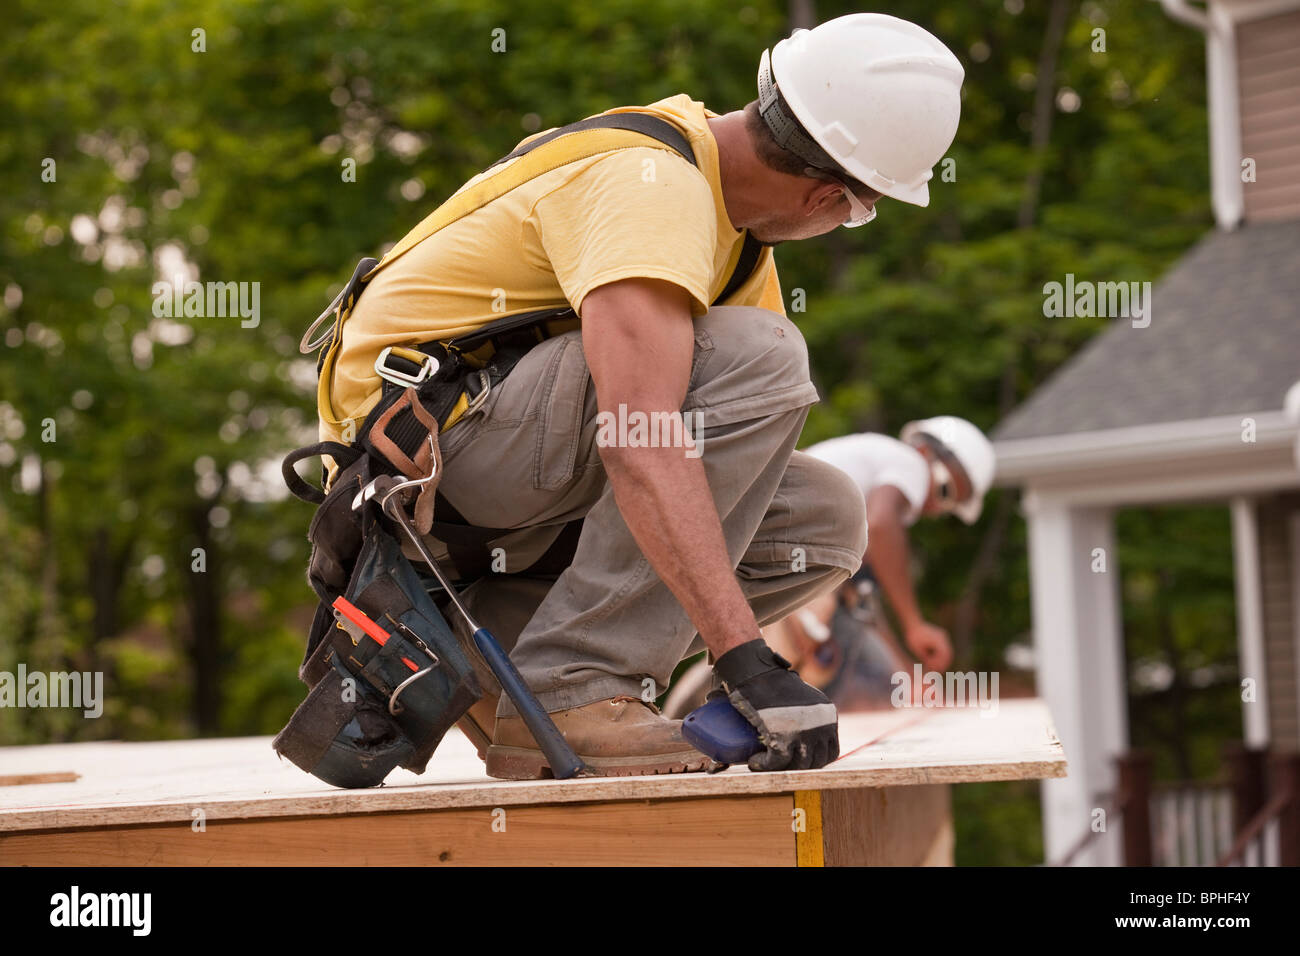 https://c8.alamy.com/comp/BPHF4Y/carpenters-laying-a-snap-line-on-a-particle-board-using-chalk-line-BPHF4Y.jpg